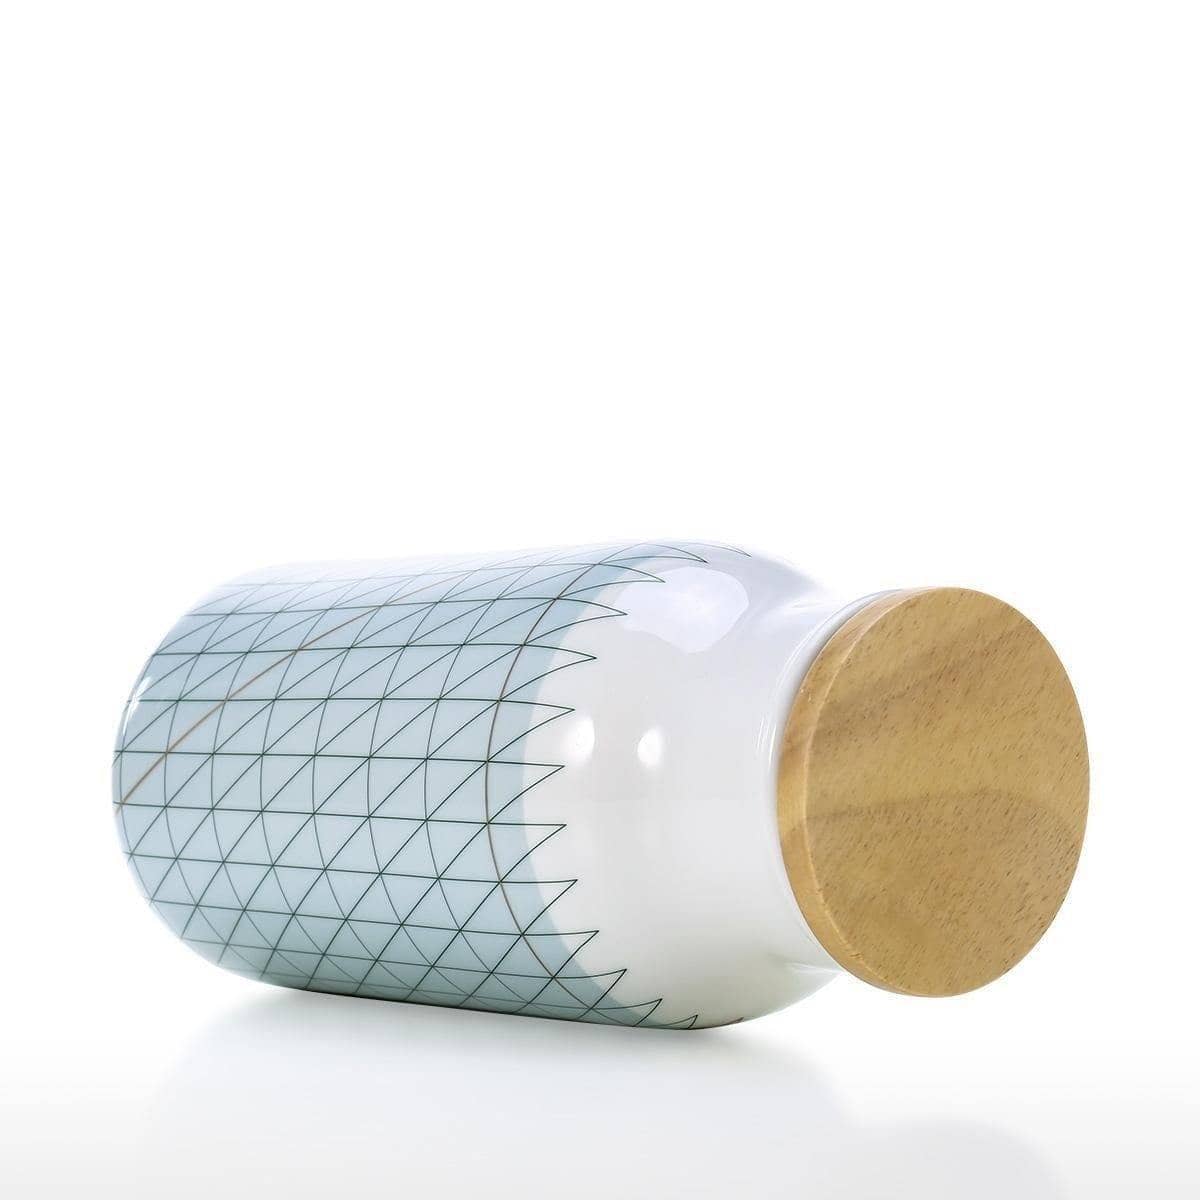 Stylish Milk Water Bottle Mug with Wooden Lid: Quench Your Thirst in Style